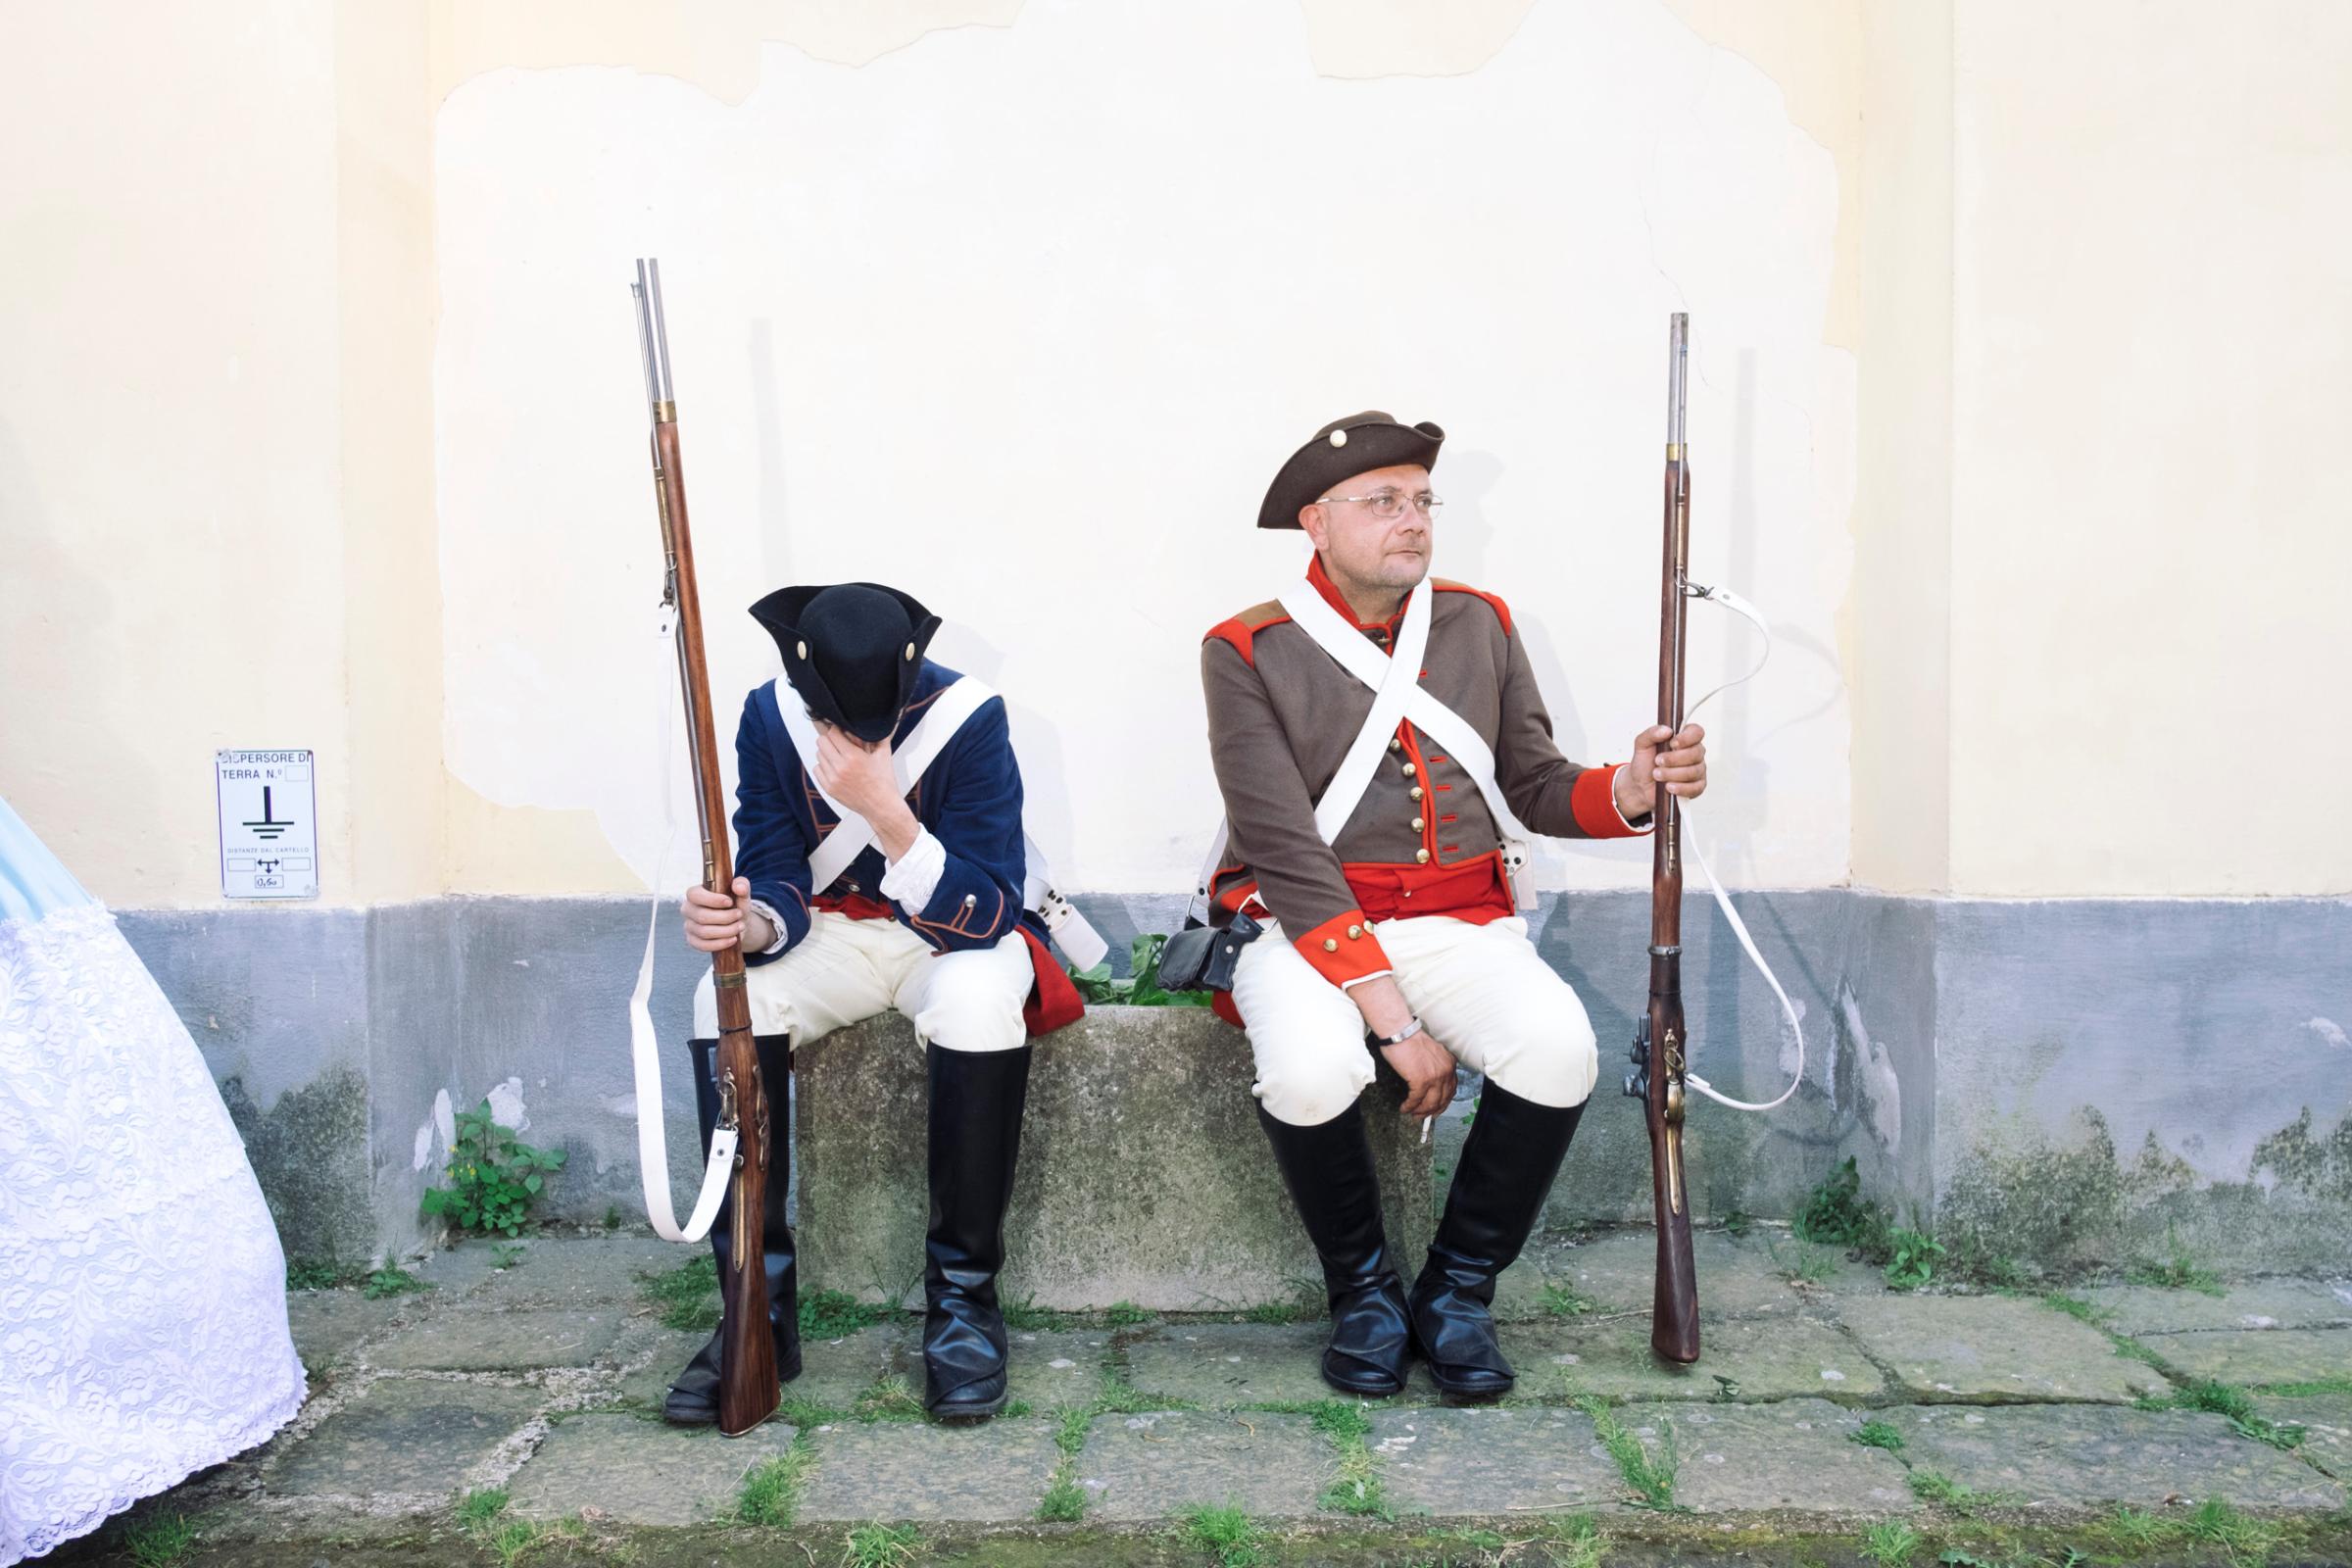 Soldiers belonging to the honor guards of the "III Reggimento Fanteria di Linea Principe" are resting during an historical parade at the Royal Palace of Capodimonte in Naples, April, 2016.